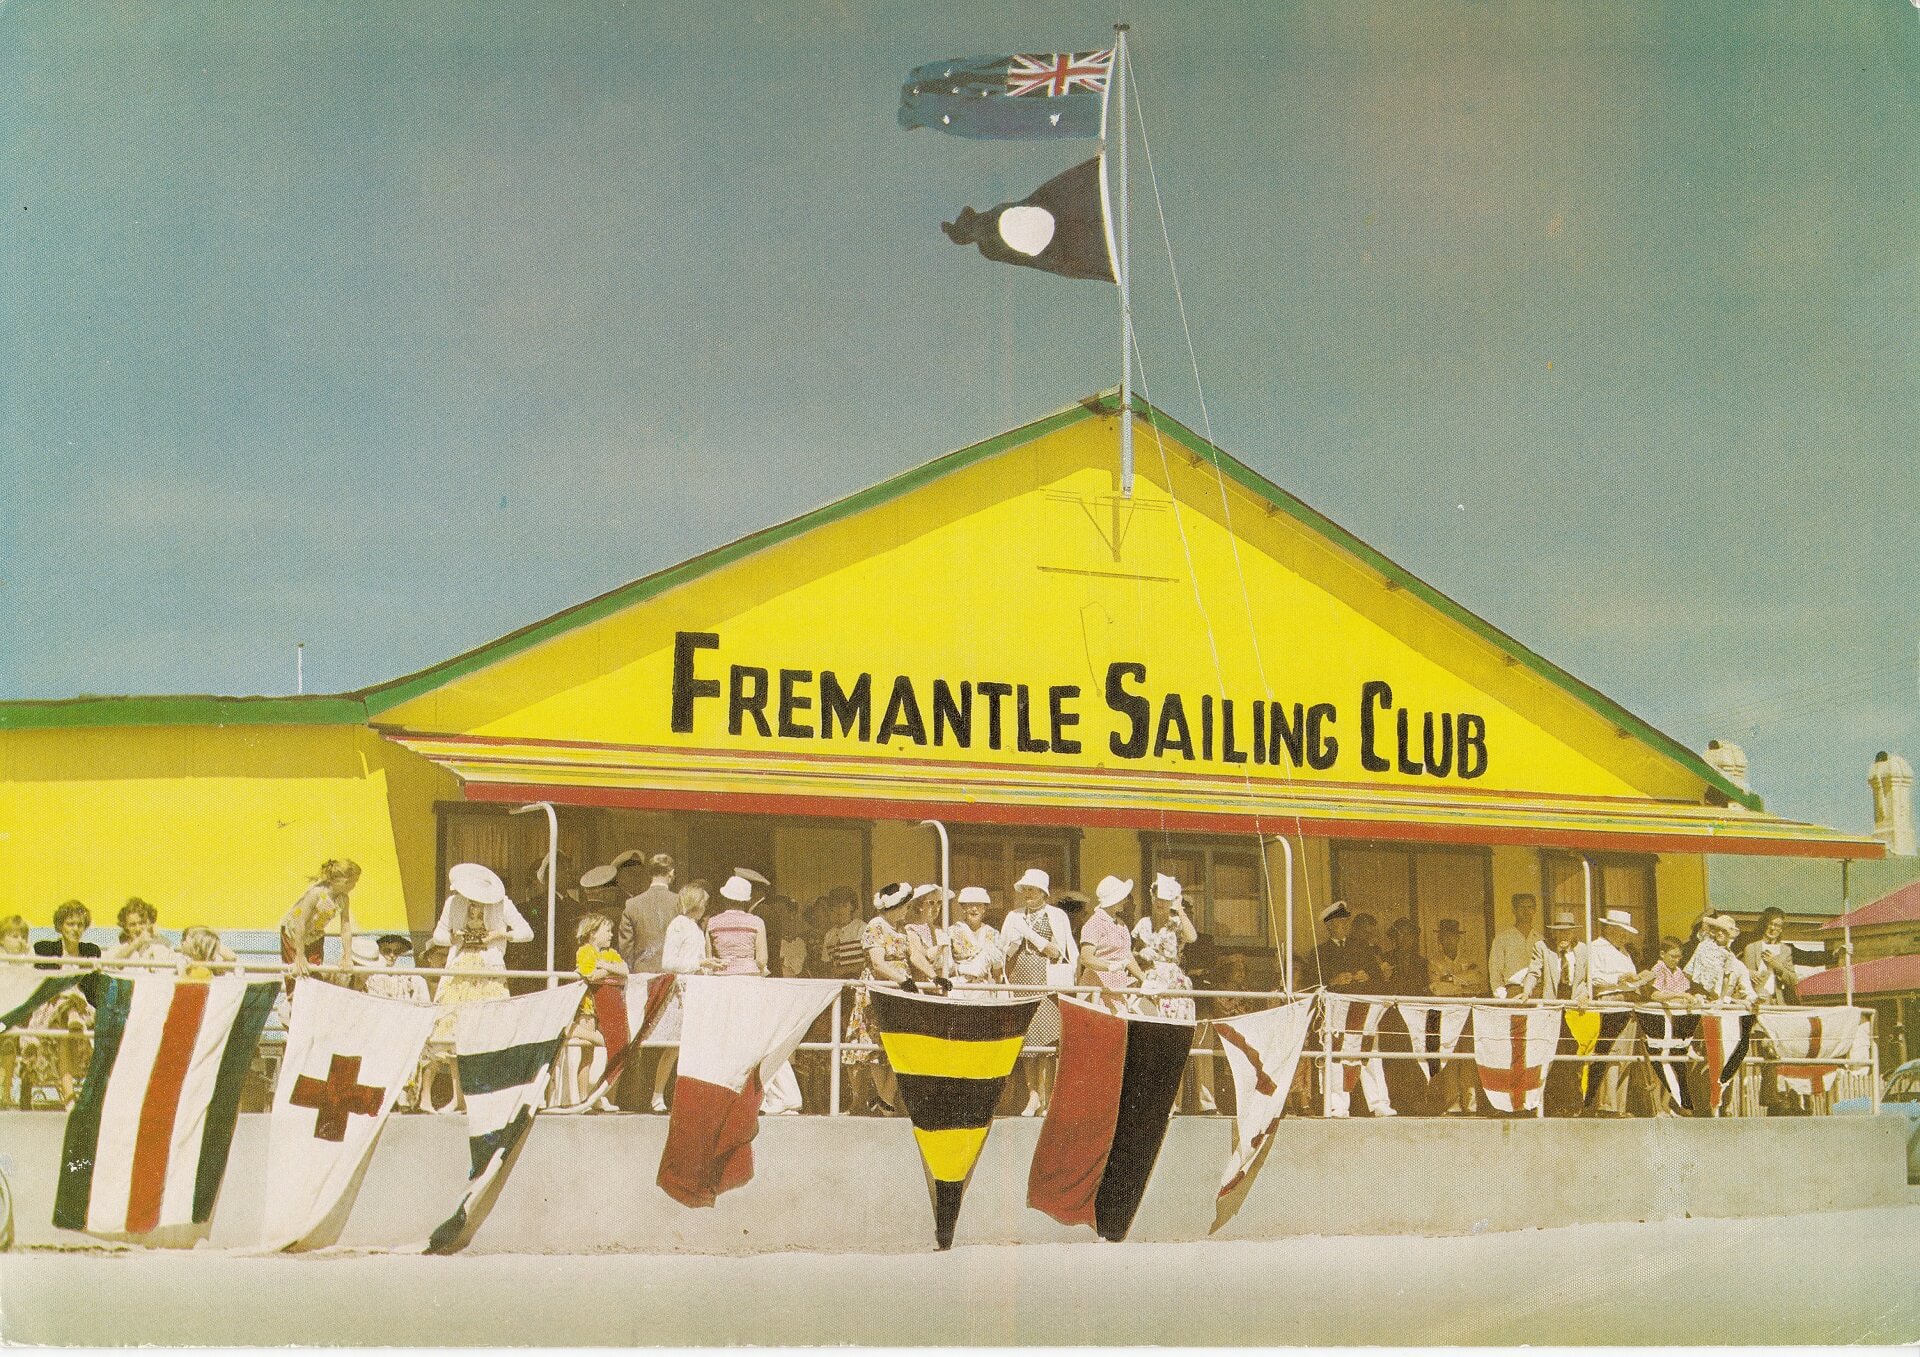 Fremantle Sailing Club Archives & History Committee